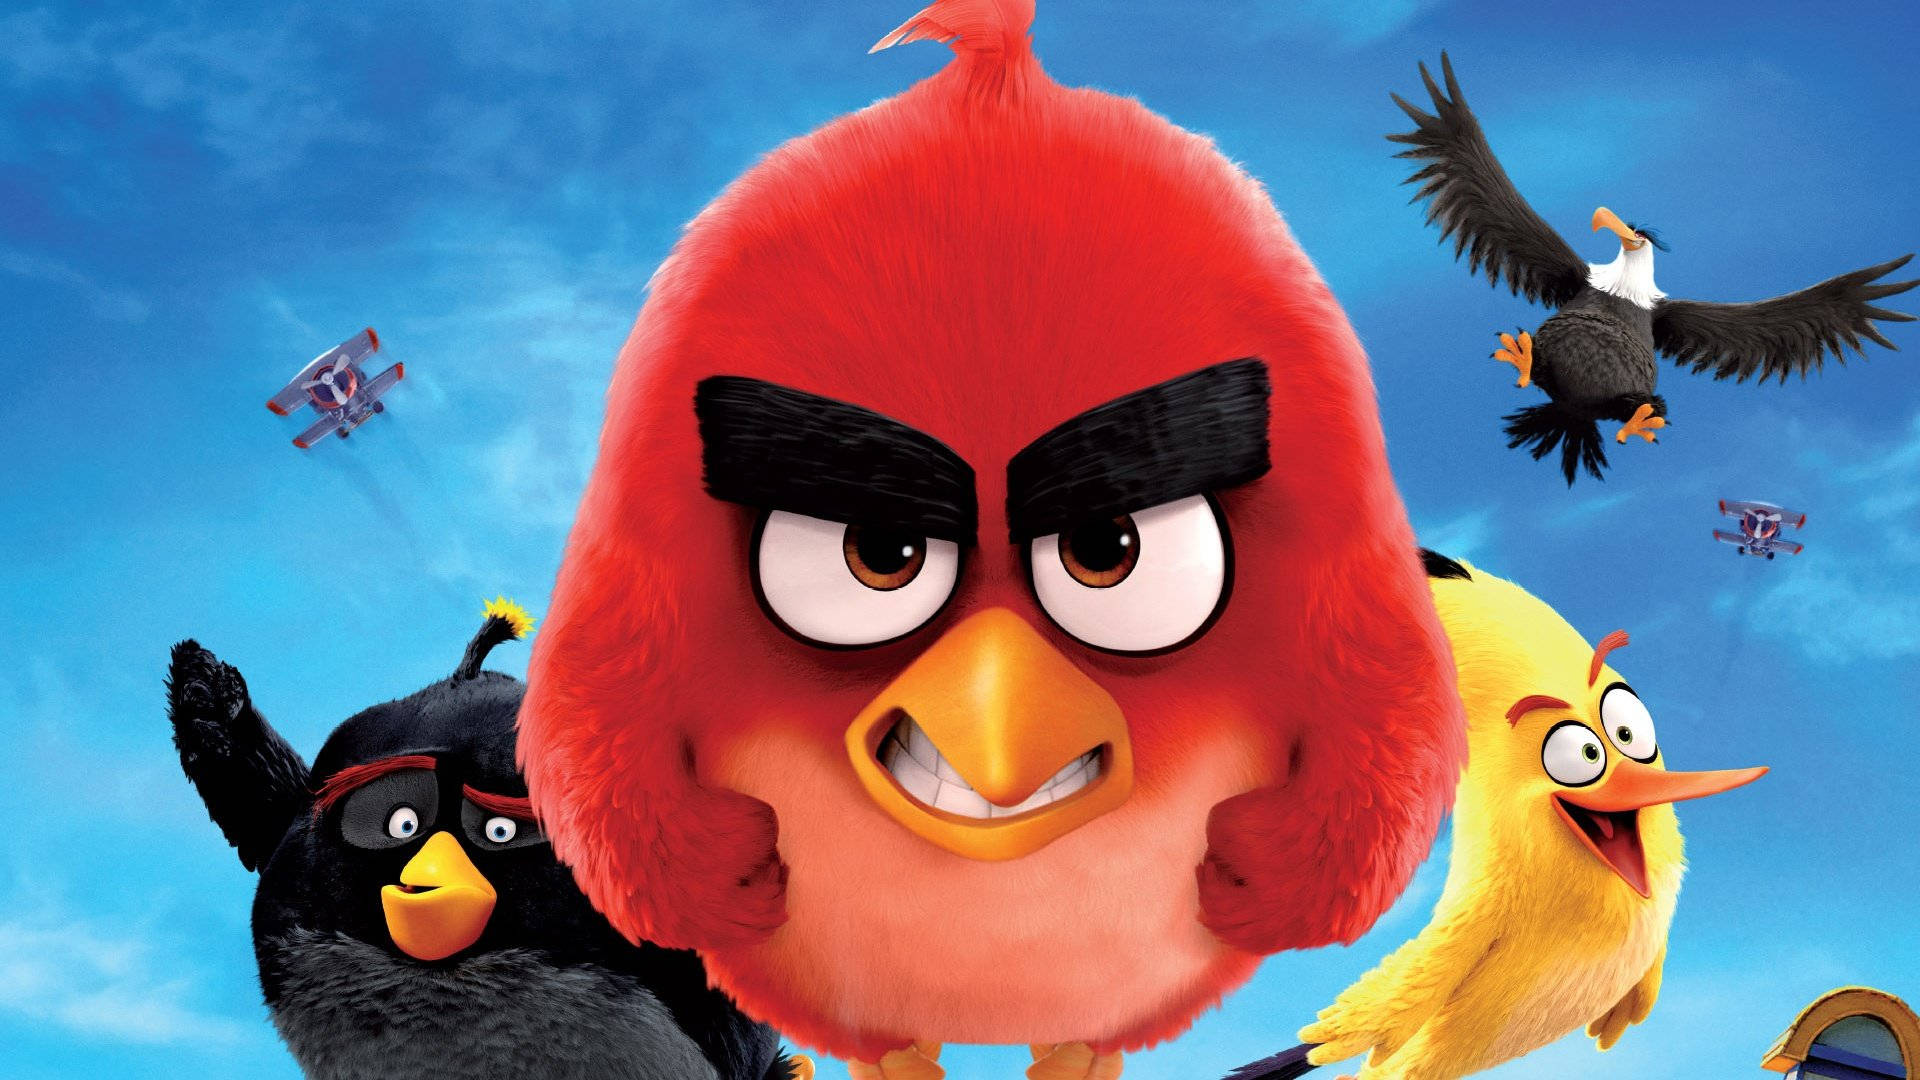 Flying Birds In The Angry Birds Movie Wallpaper